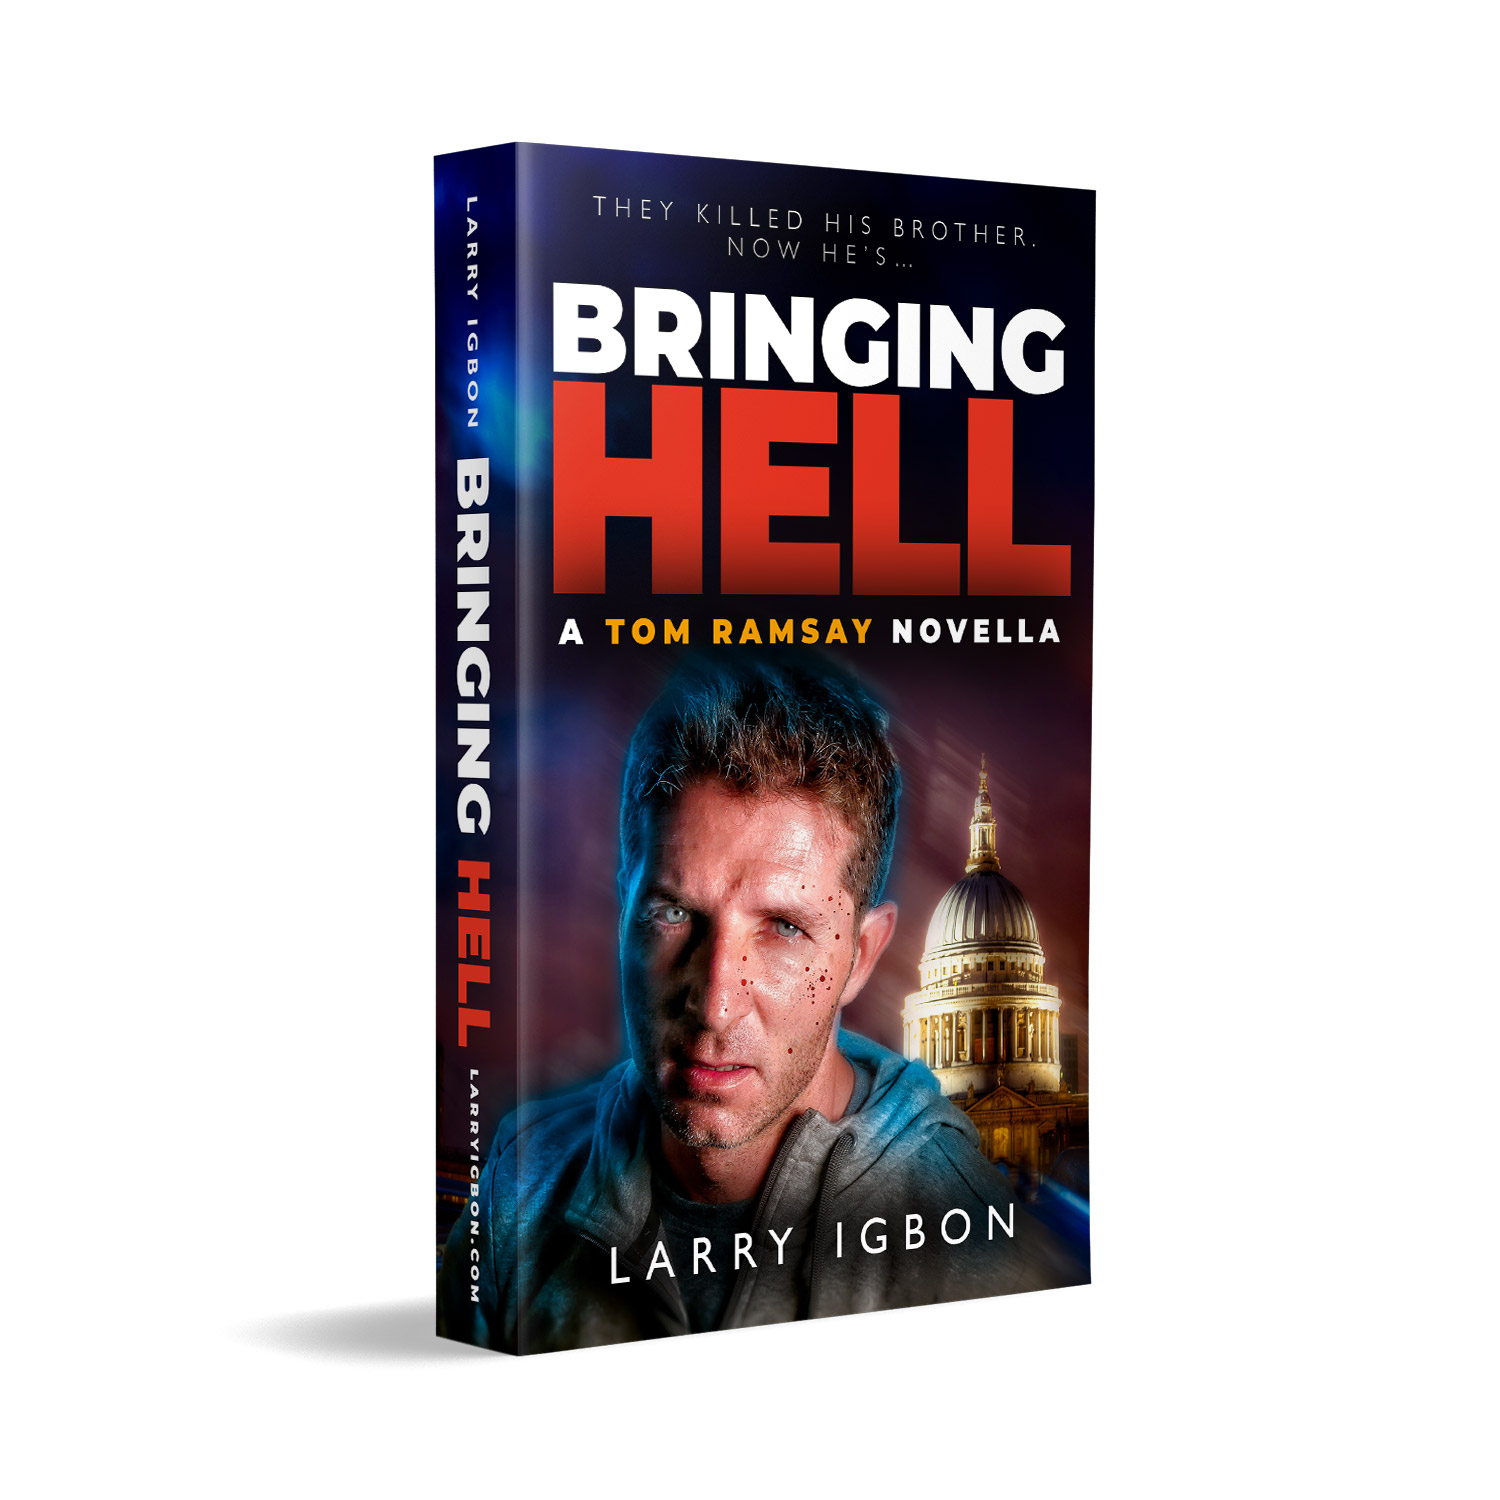 'Bringing Hell' is a hard-bitten revenge thriller. The author is Larry Igbon. The book cover design and interior formatting are by Mark Thomas. To learn more about what Mark could do for your book, please visit coverness.com.